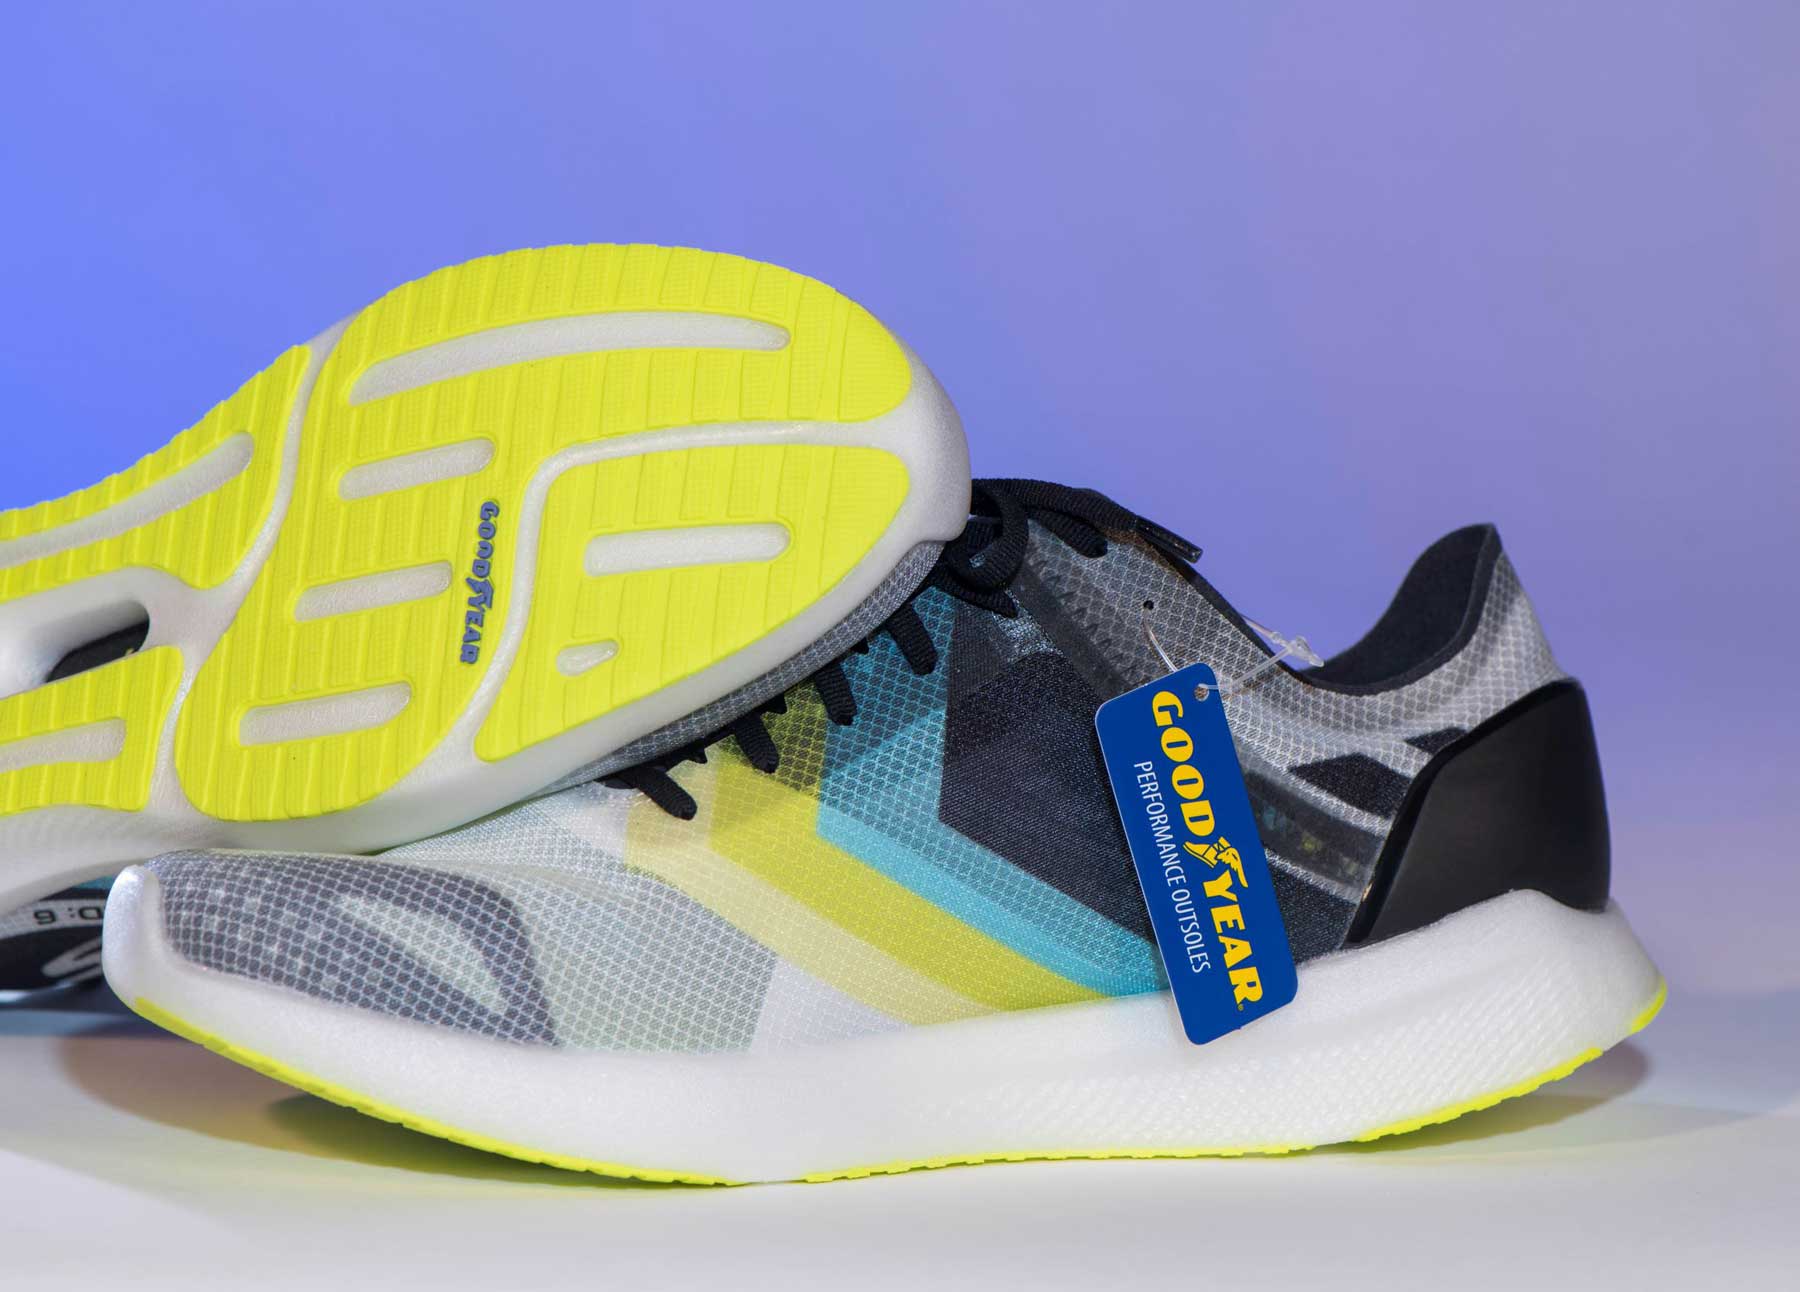 Skechers Collaborates with Goodyear on 